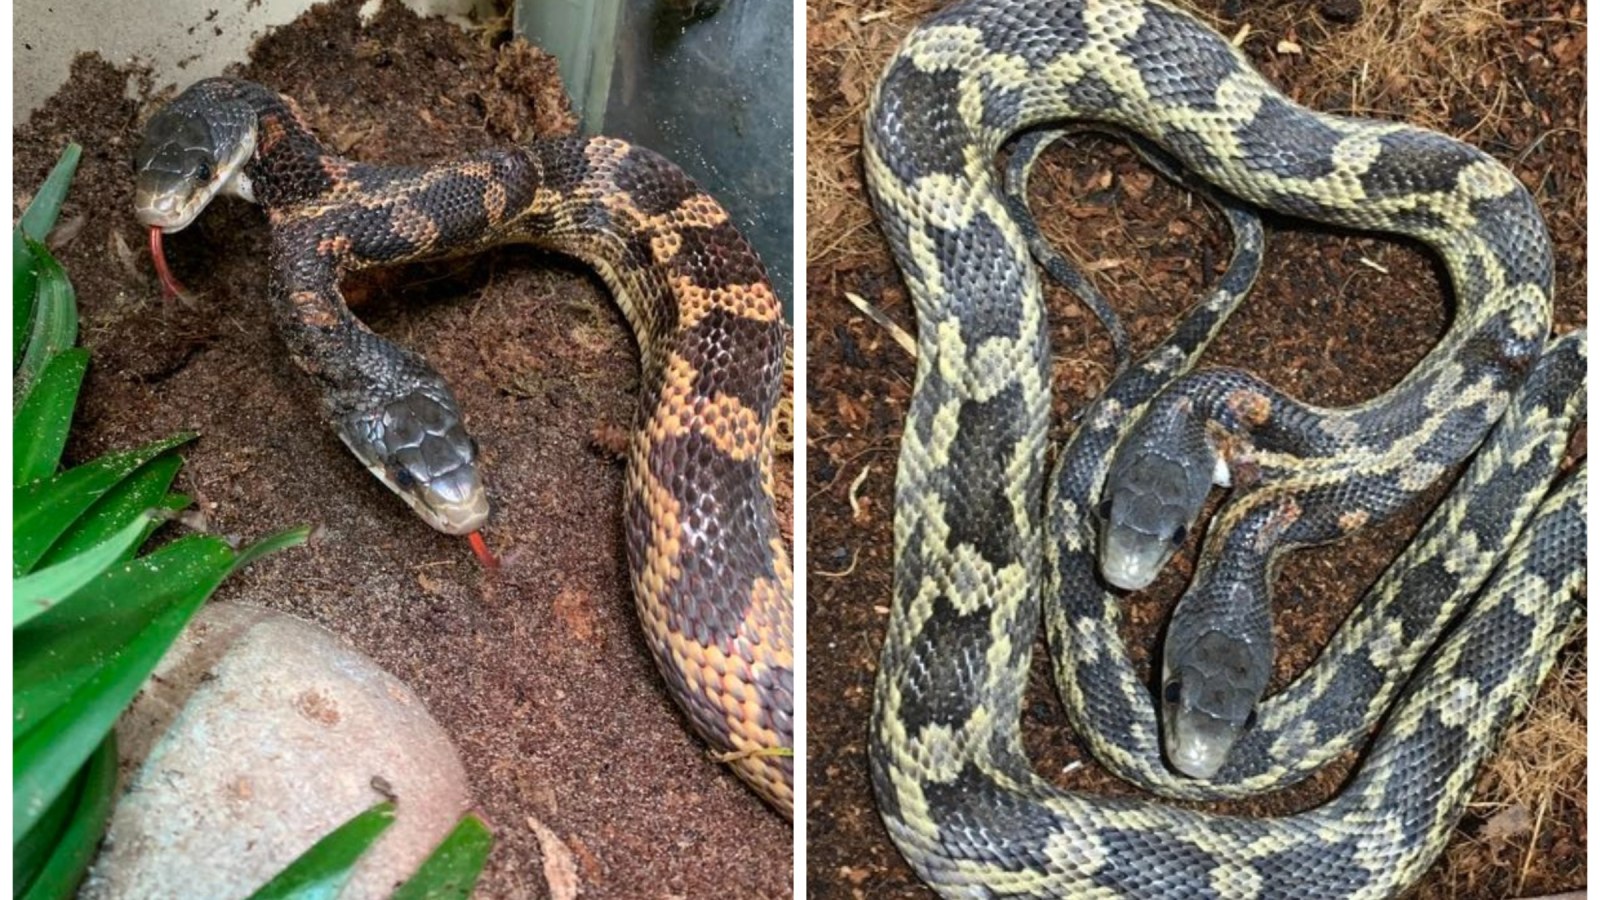 A Rare Two-Headed Snake Is Back on Exhibit at a Texas Zoo, Smart News